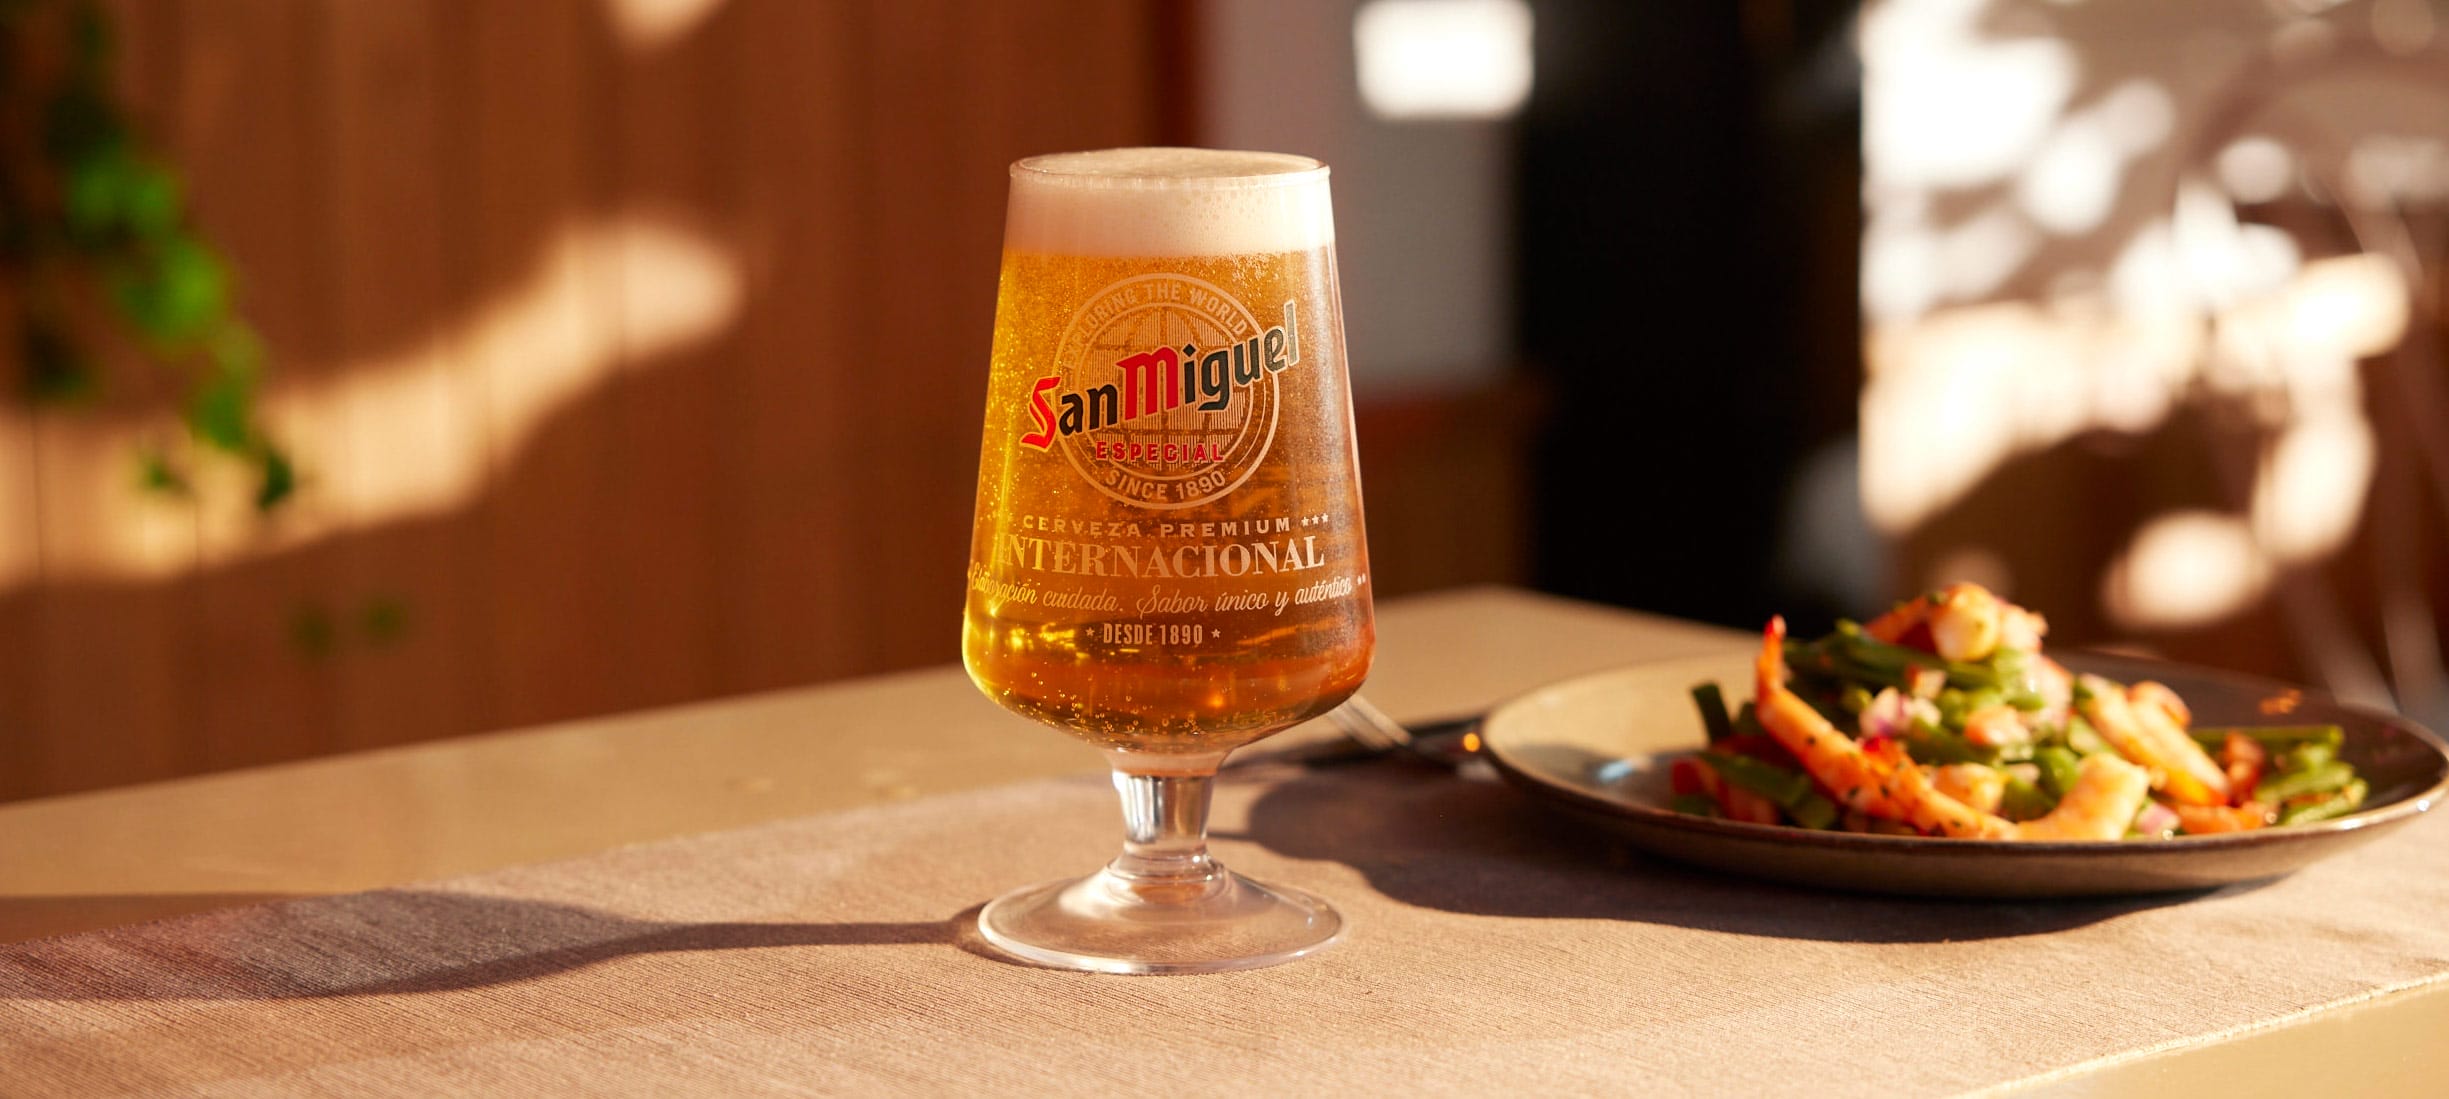 Get the inspiration you need from the team at San Miguel!